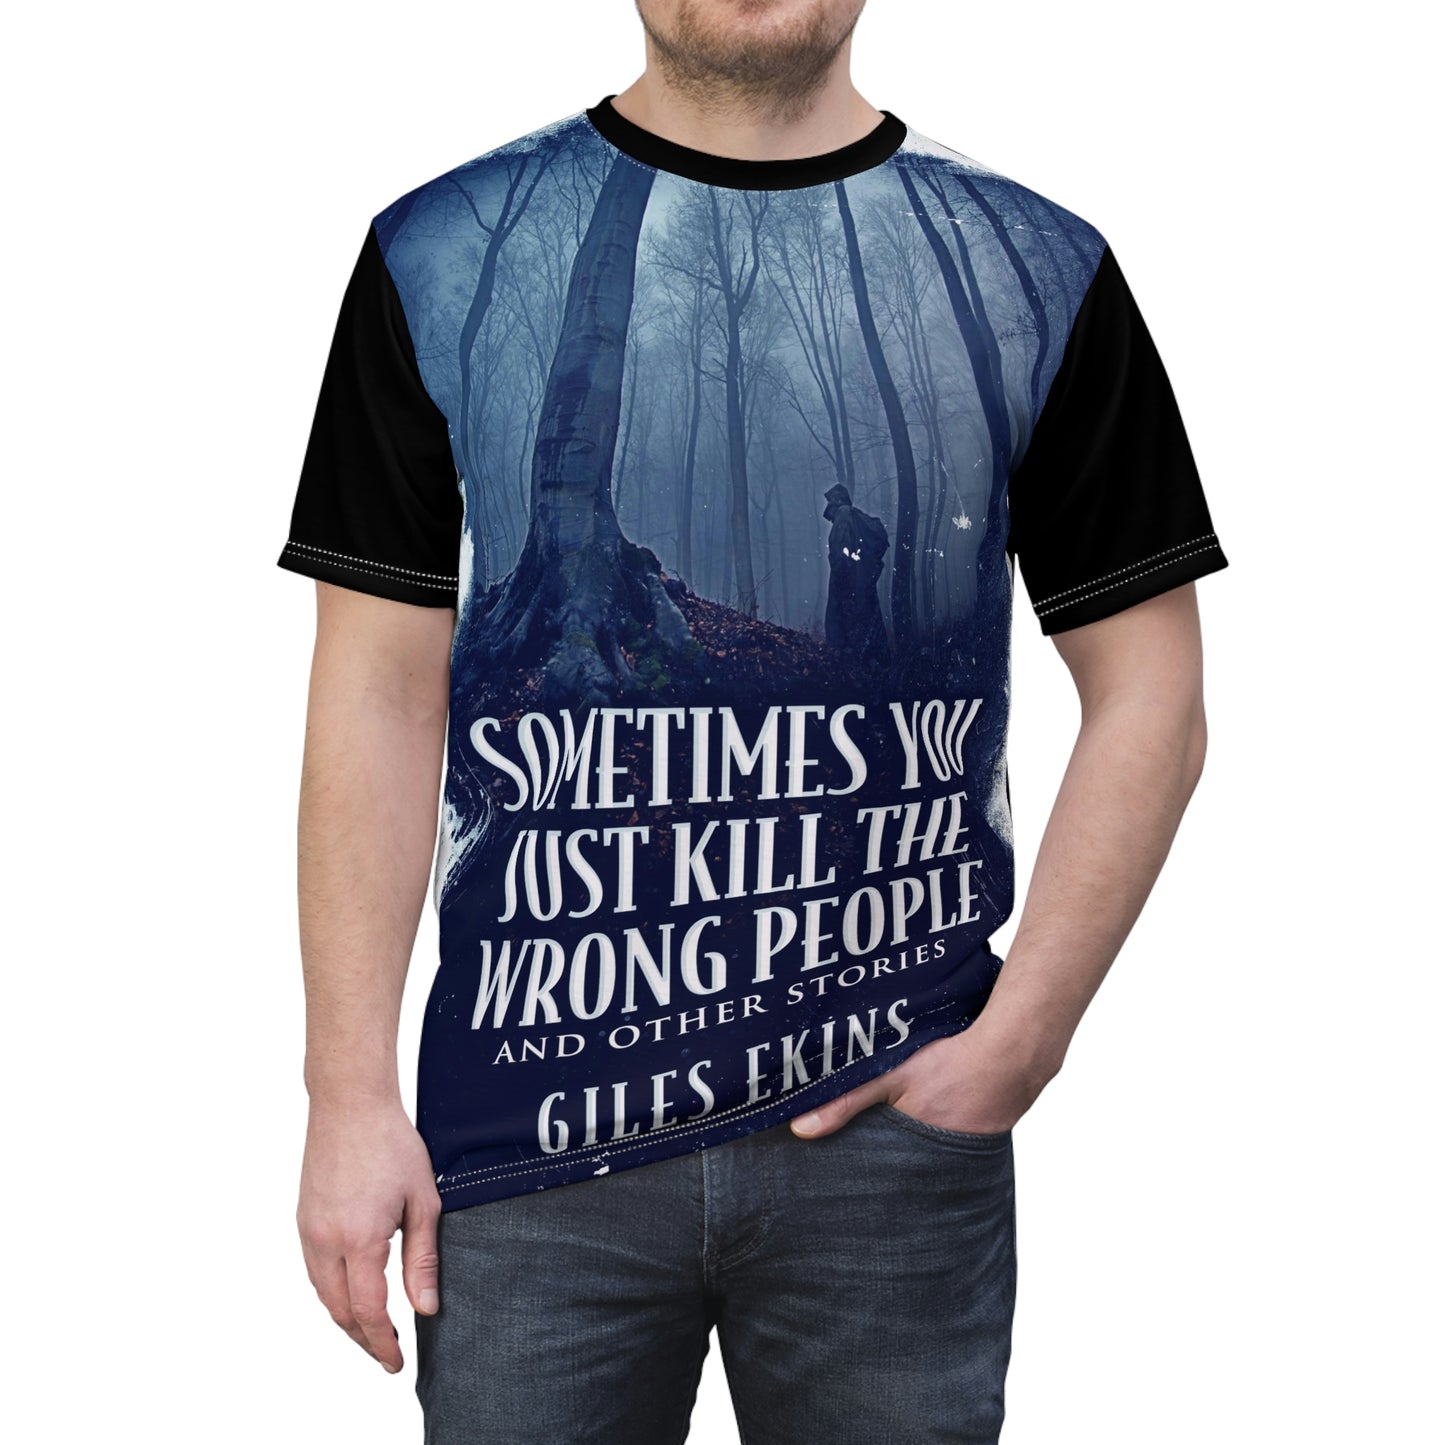 Sometimes You Just Kill The Wrong People and Other Stories - Unisex All-Over Print Cut & Sew T-Shirt